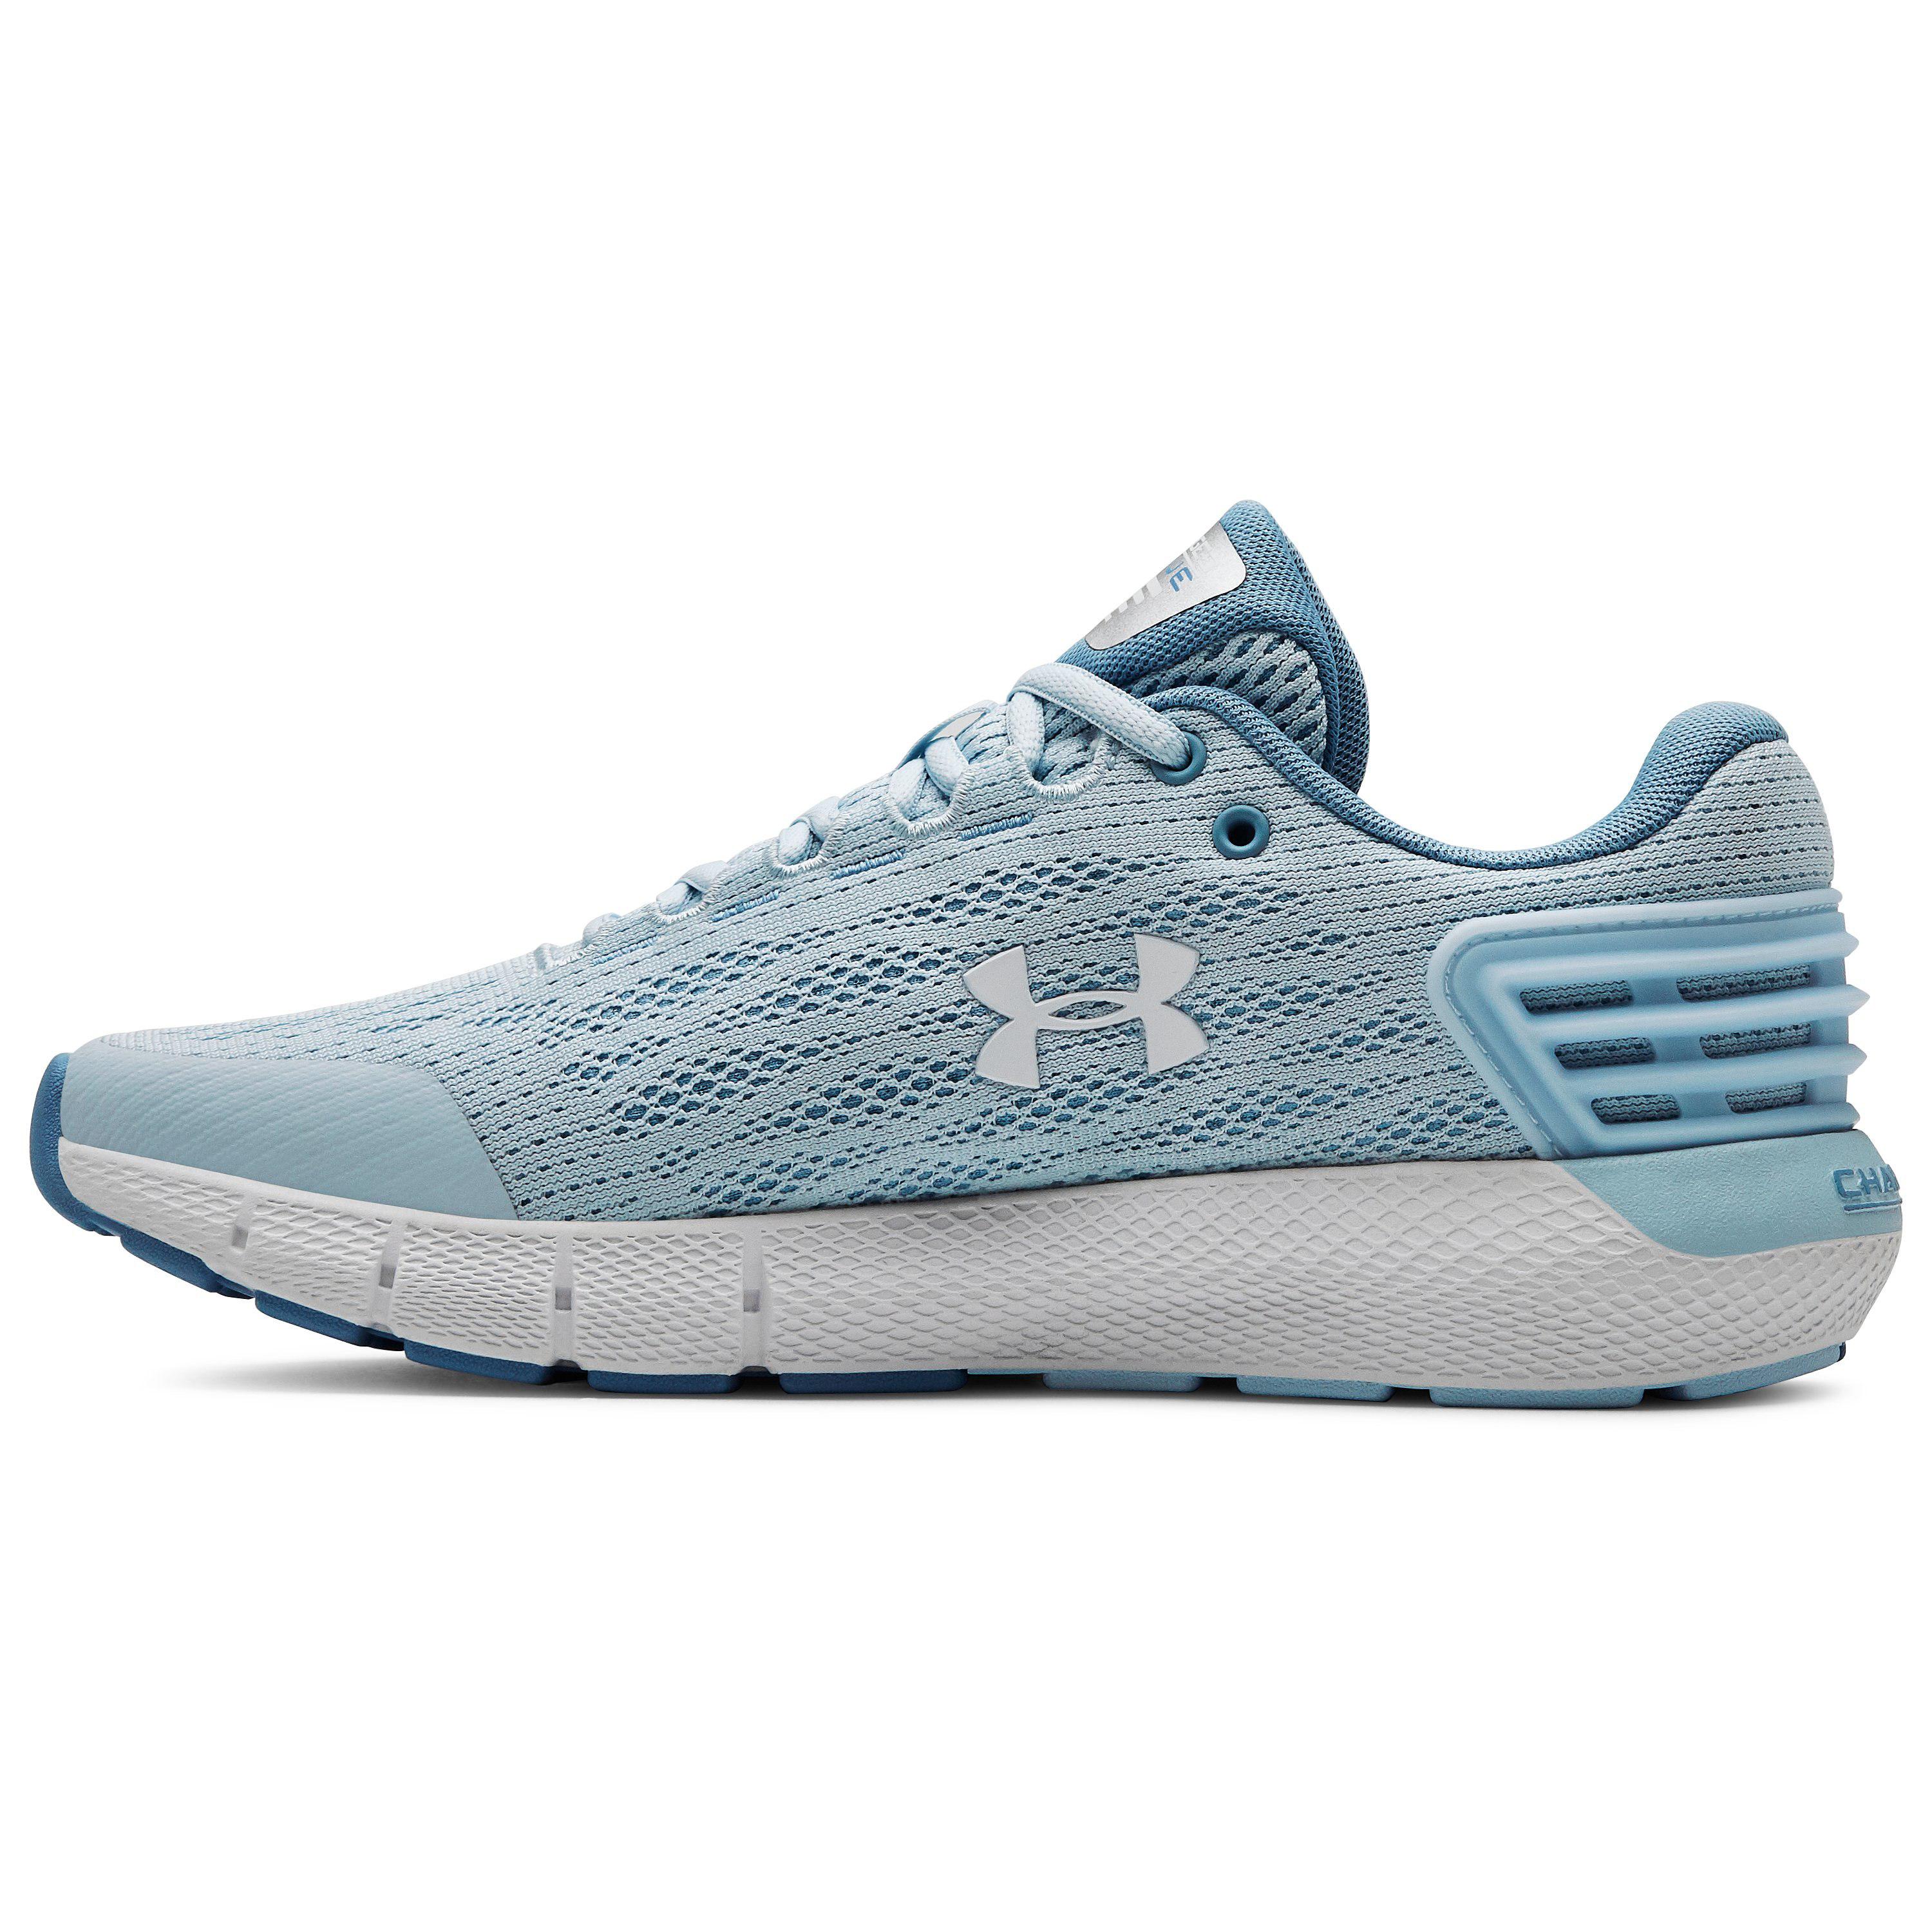 Under Armour Rubber Charged Rogue Women's Running Shoes in Blue - Lyst